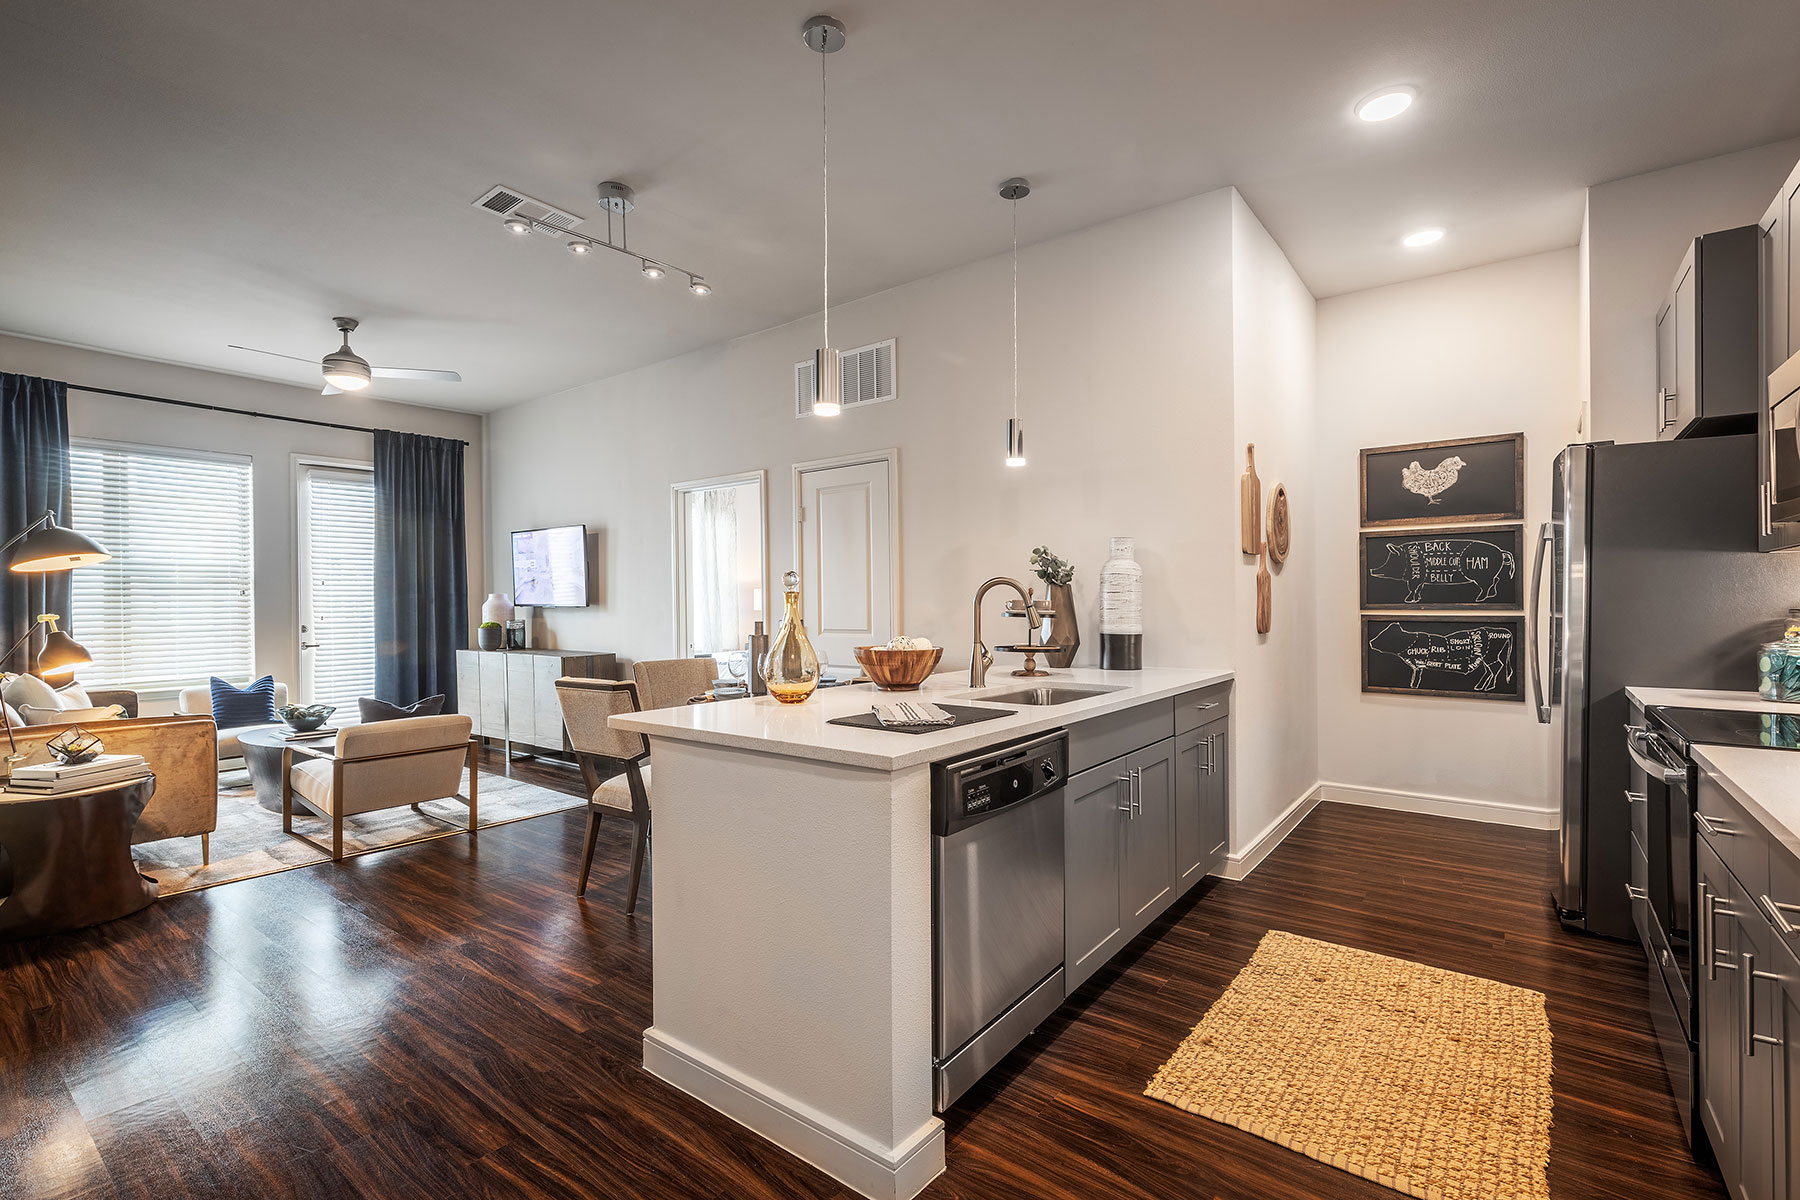 Wide shot of the living area with large windows and comfortable seating, beautiful wooden floor, and kitchen with stainless steel appliances, pendant lights, and farm animal artwork.